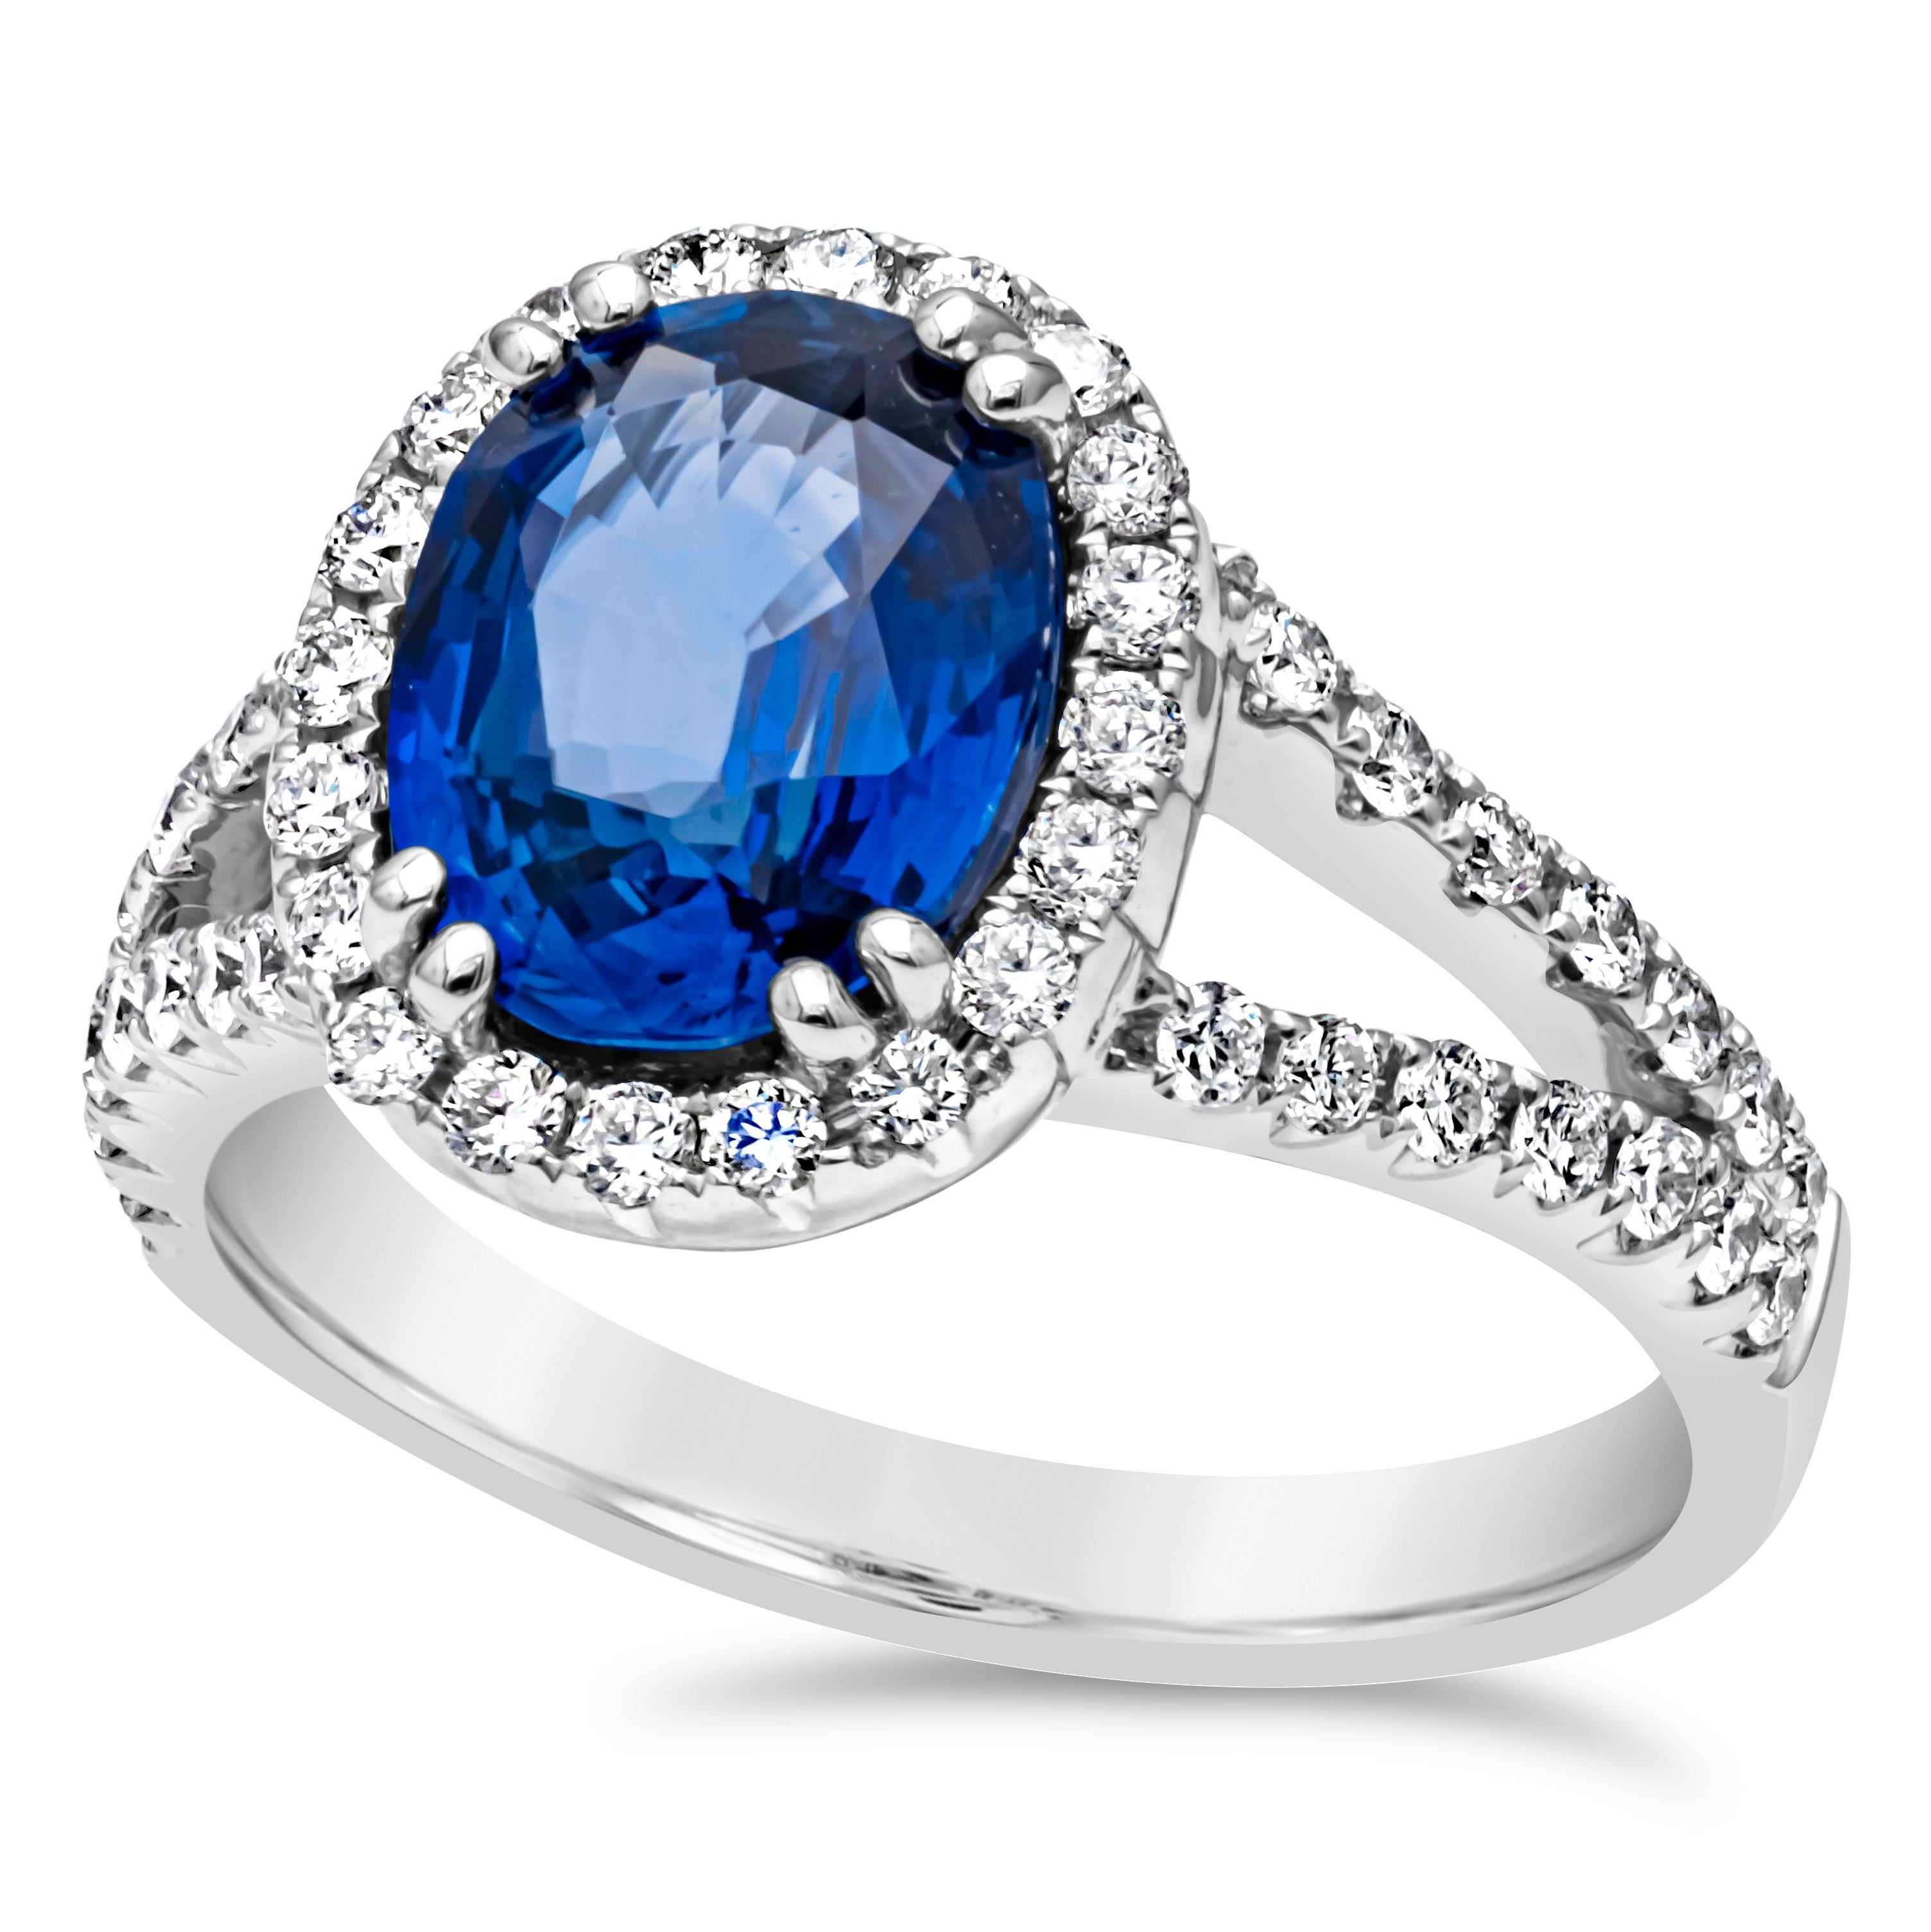 Contemporary GIA Certified 2.68 Carat Oval Cut Heated Sri Lanka Sapphire Halo Engagement Ring For Sale